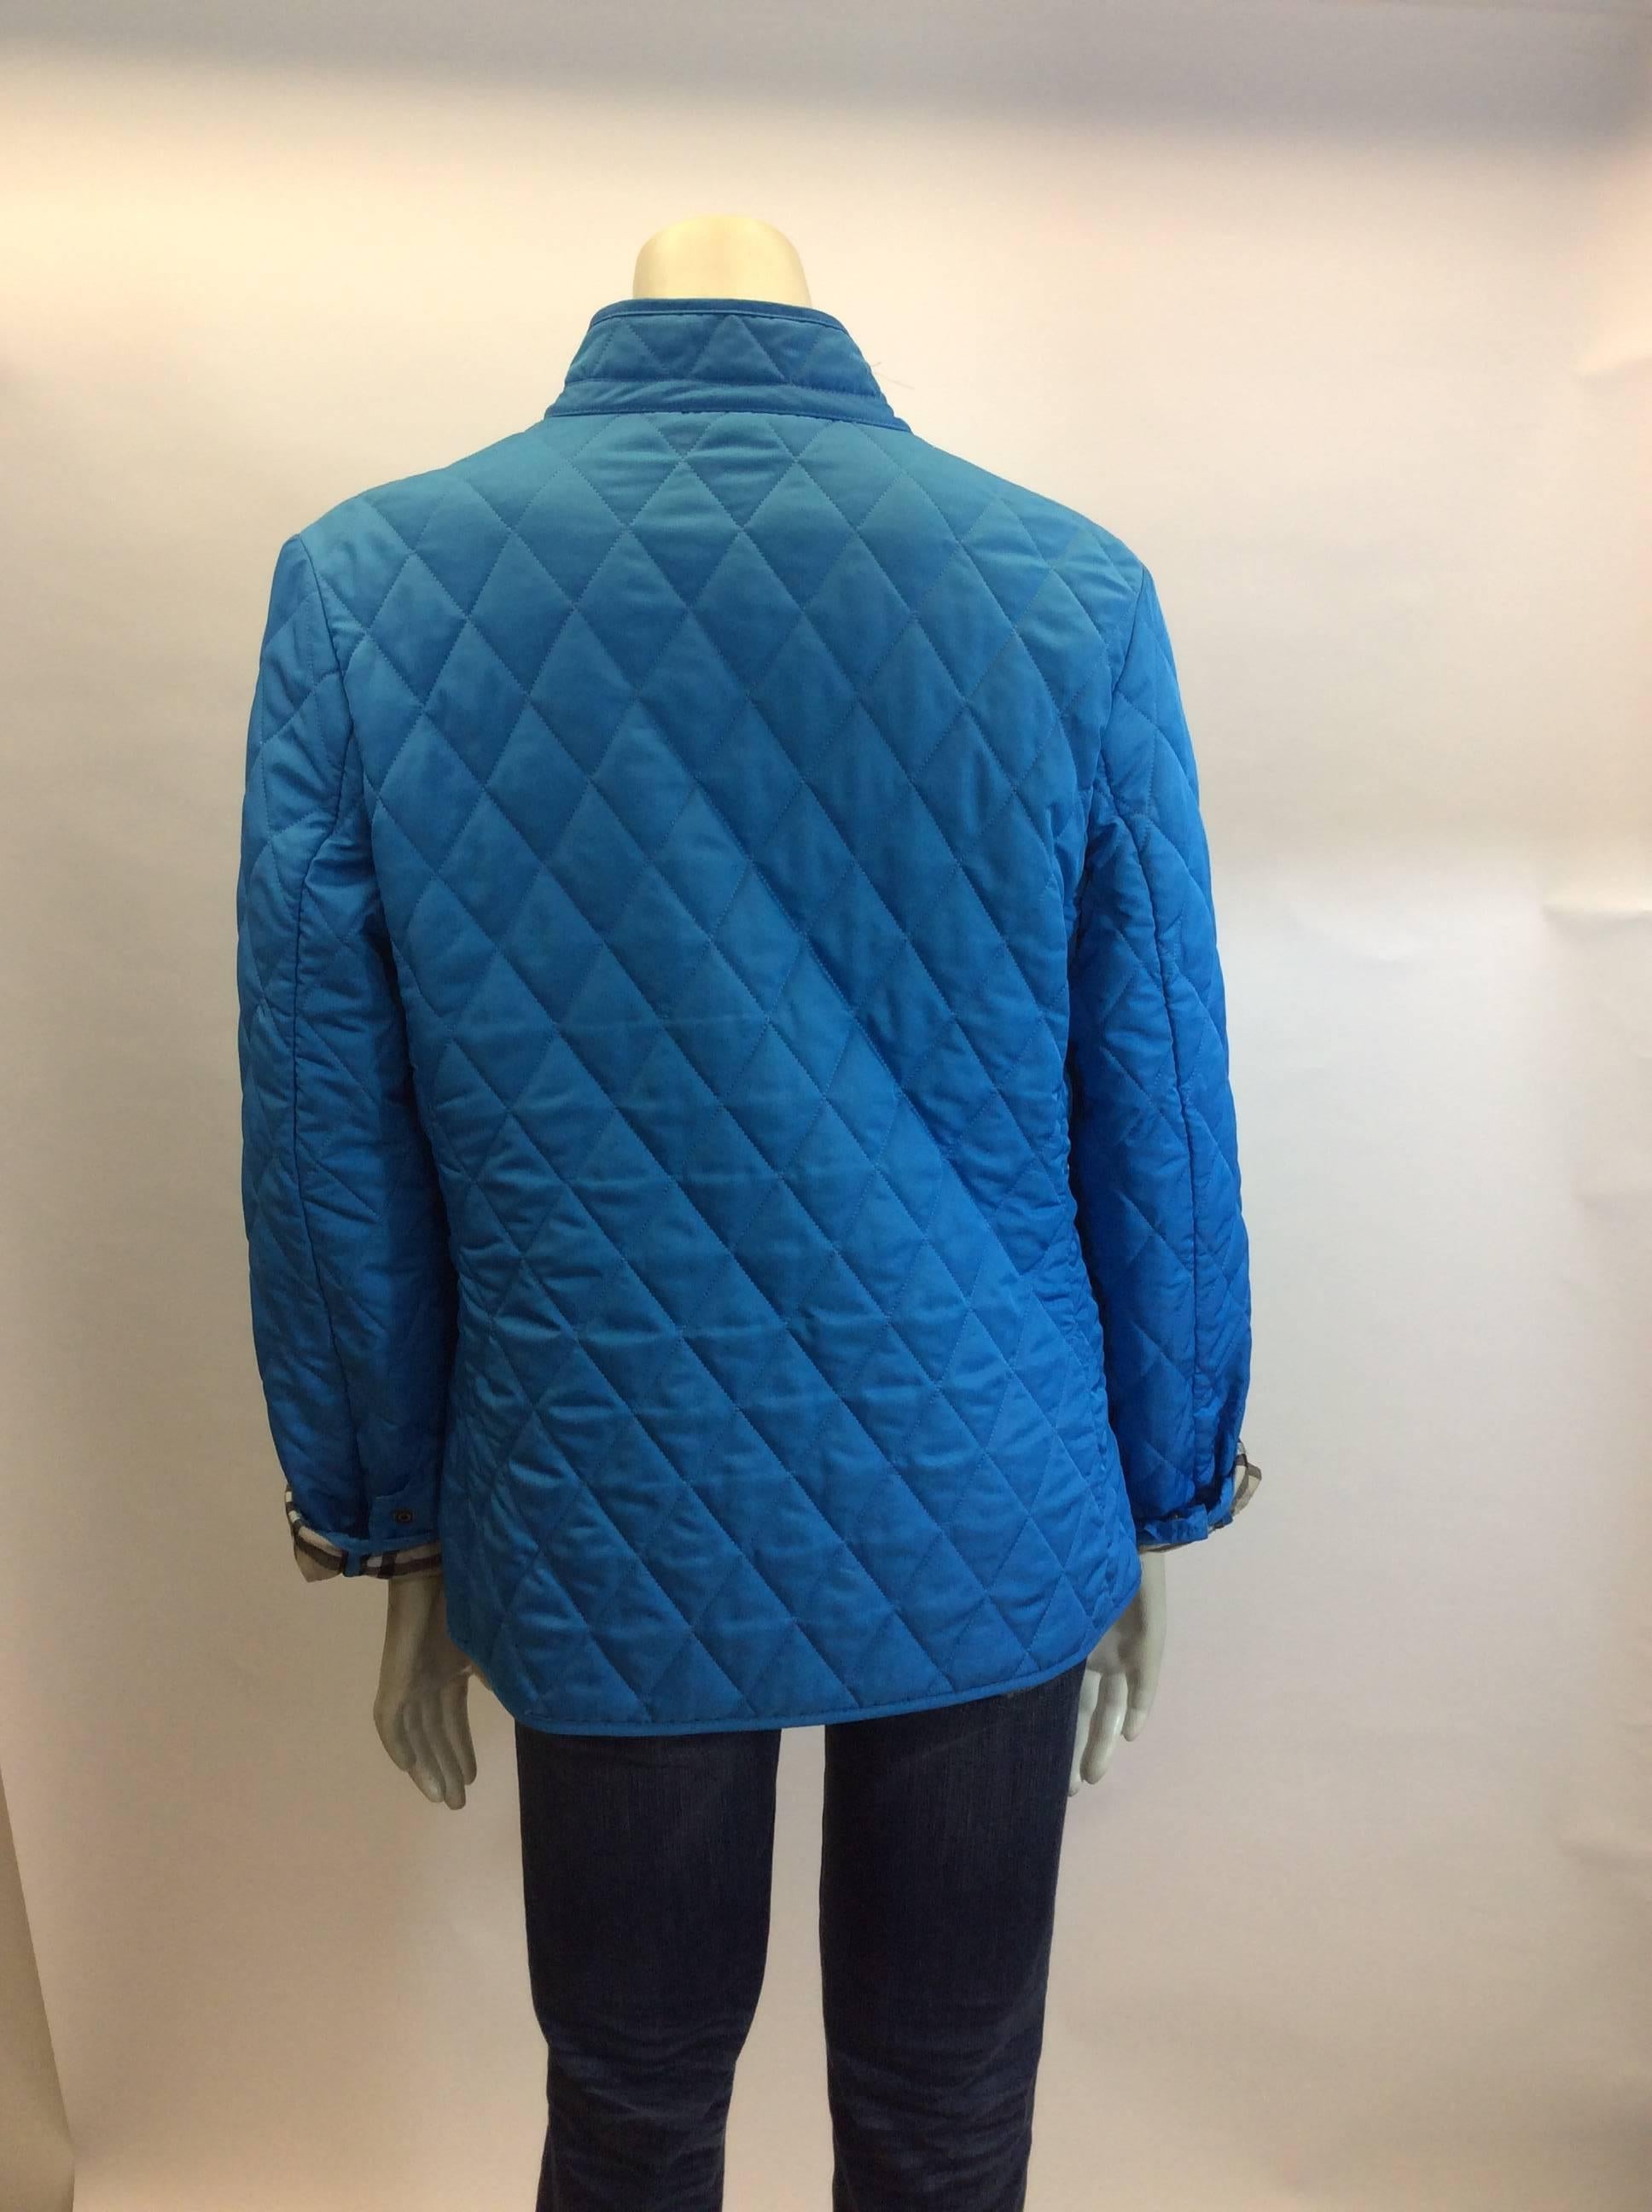 Burberry Blue Quilted Jacket In Excellent Condition For Sale In Narberth, PA